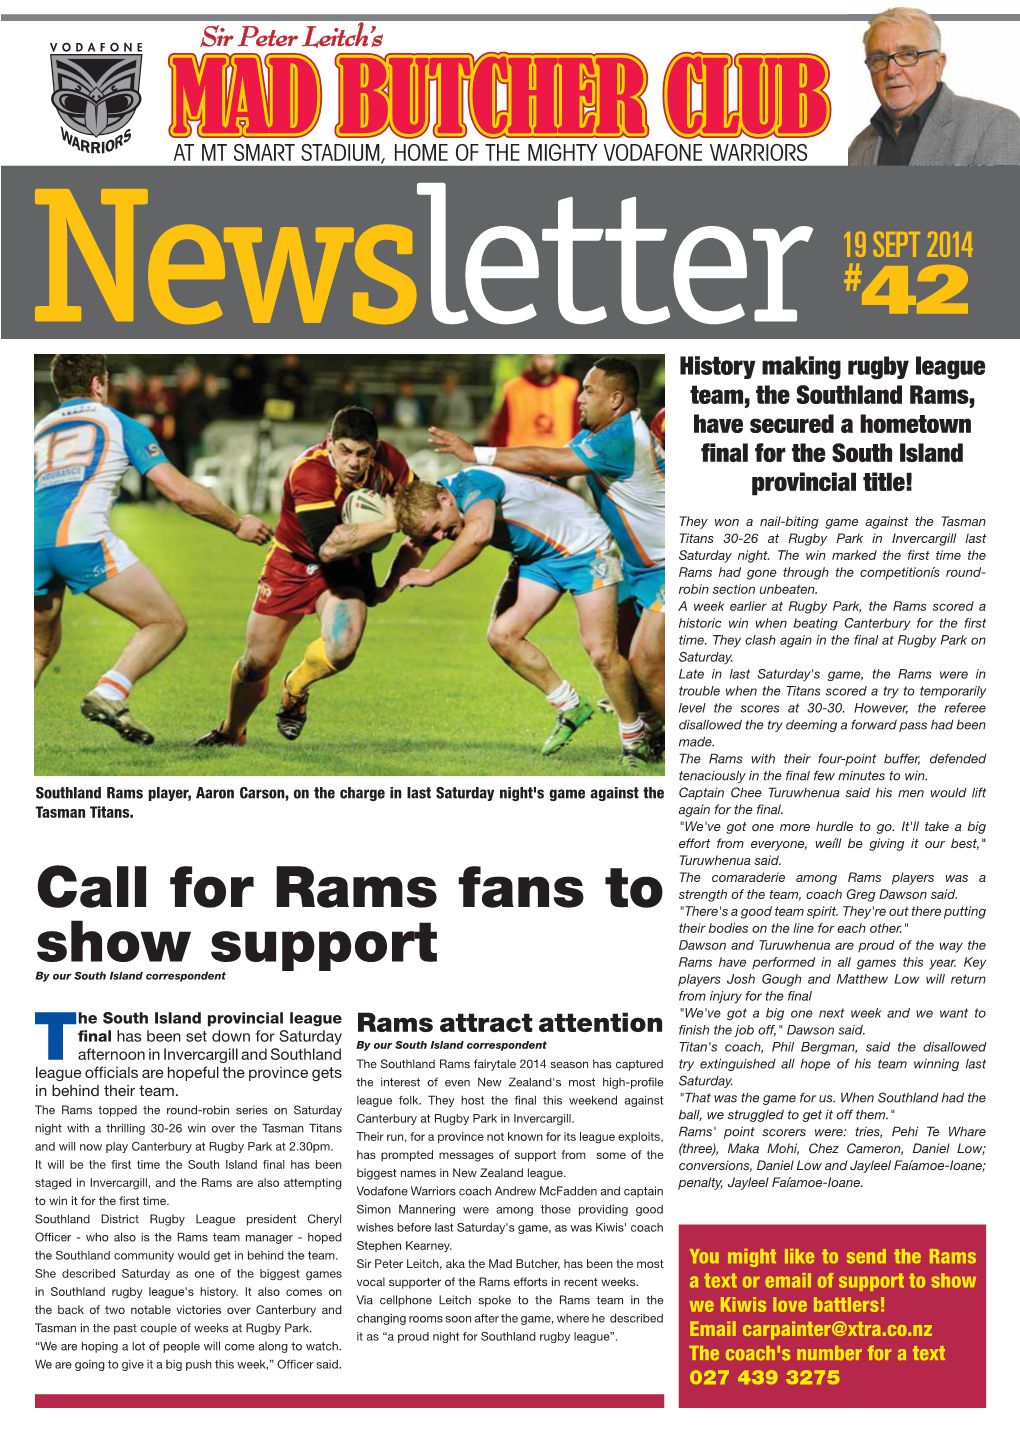 Call for Rams Fans to Show Support